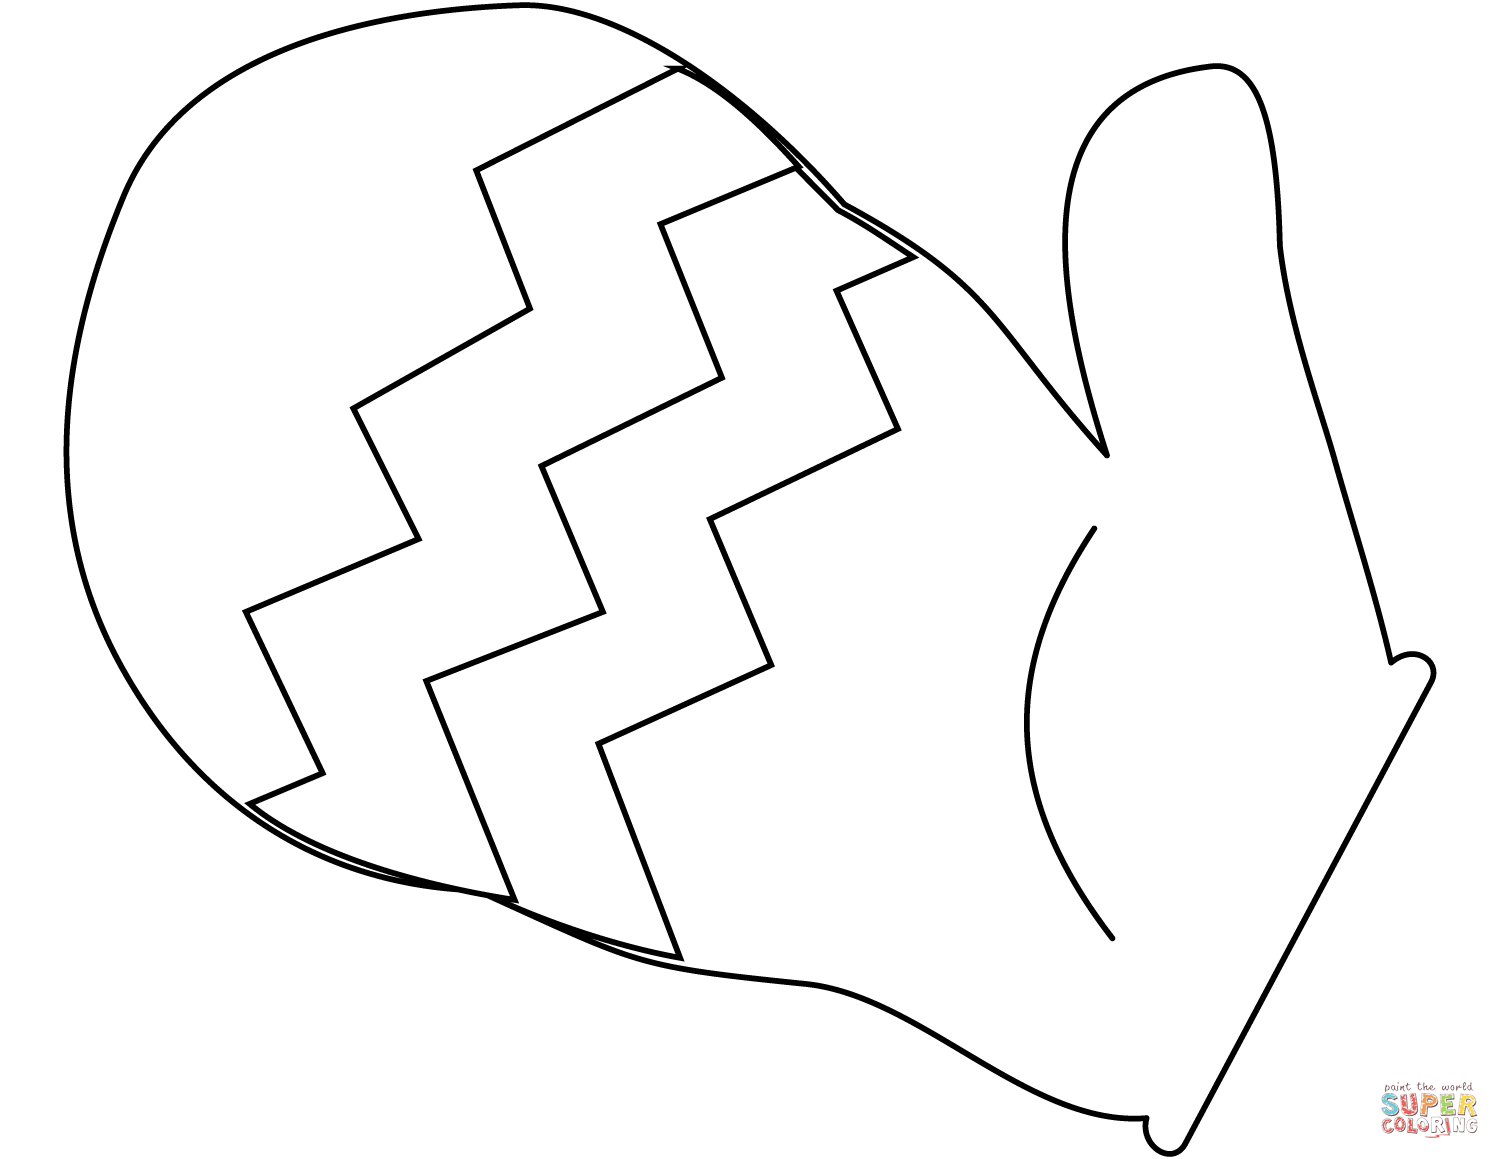 Mitten coloring page free printable coloring pages